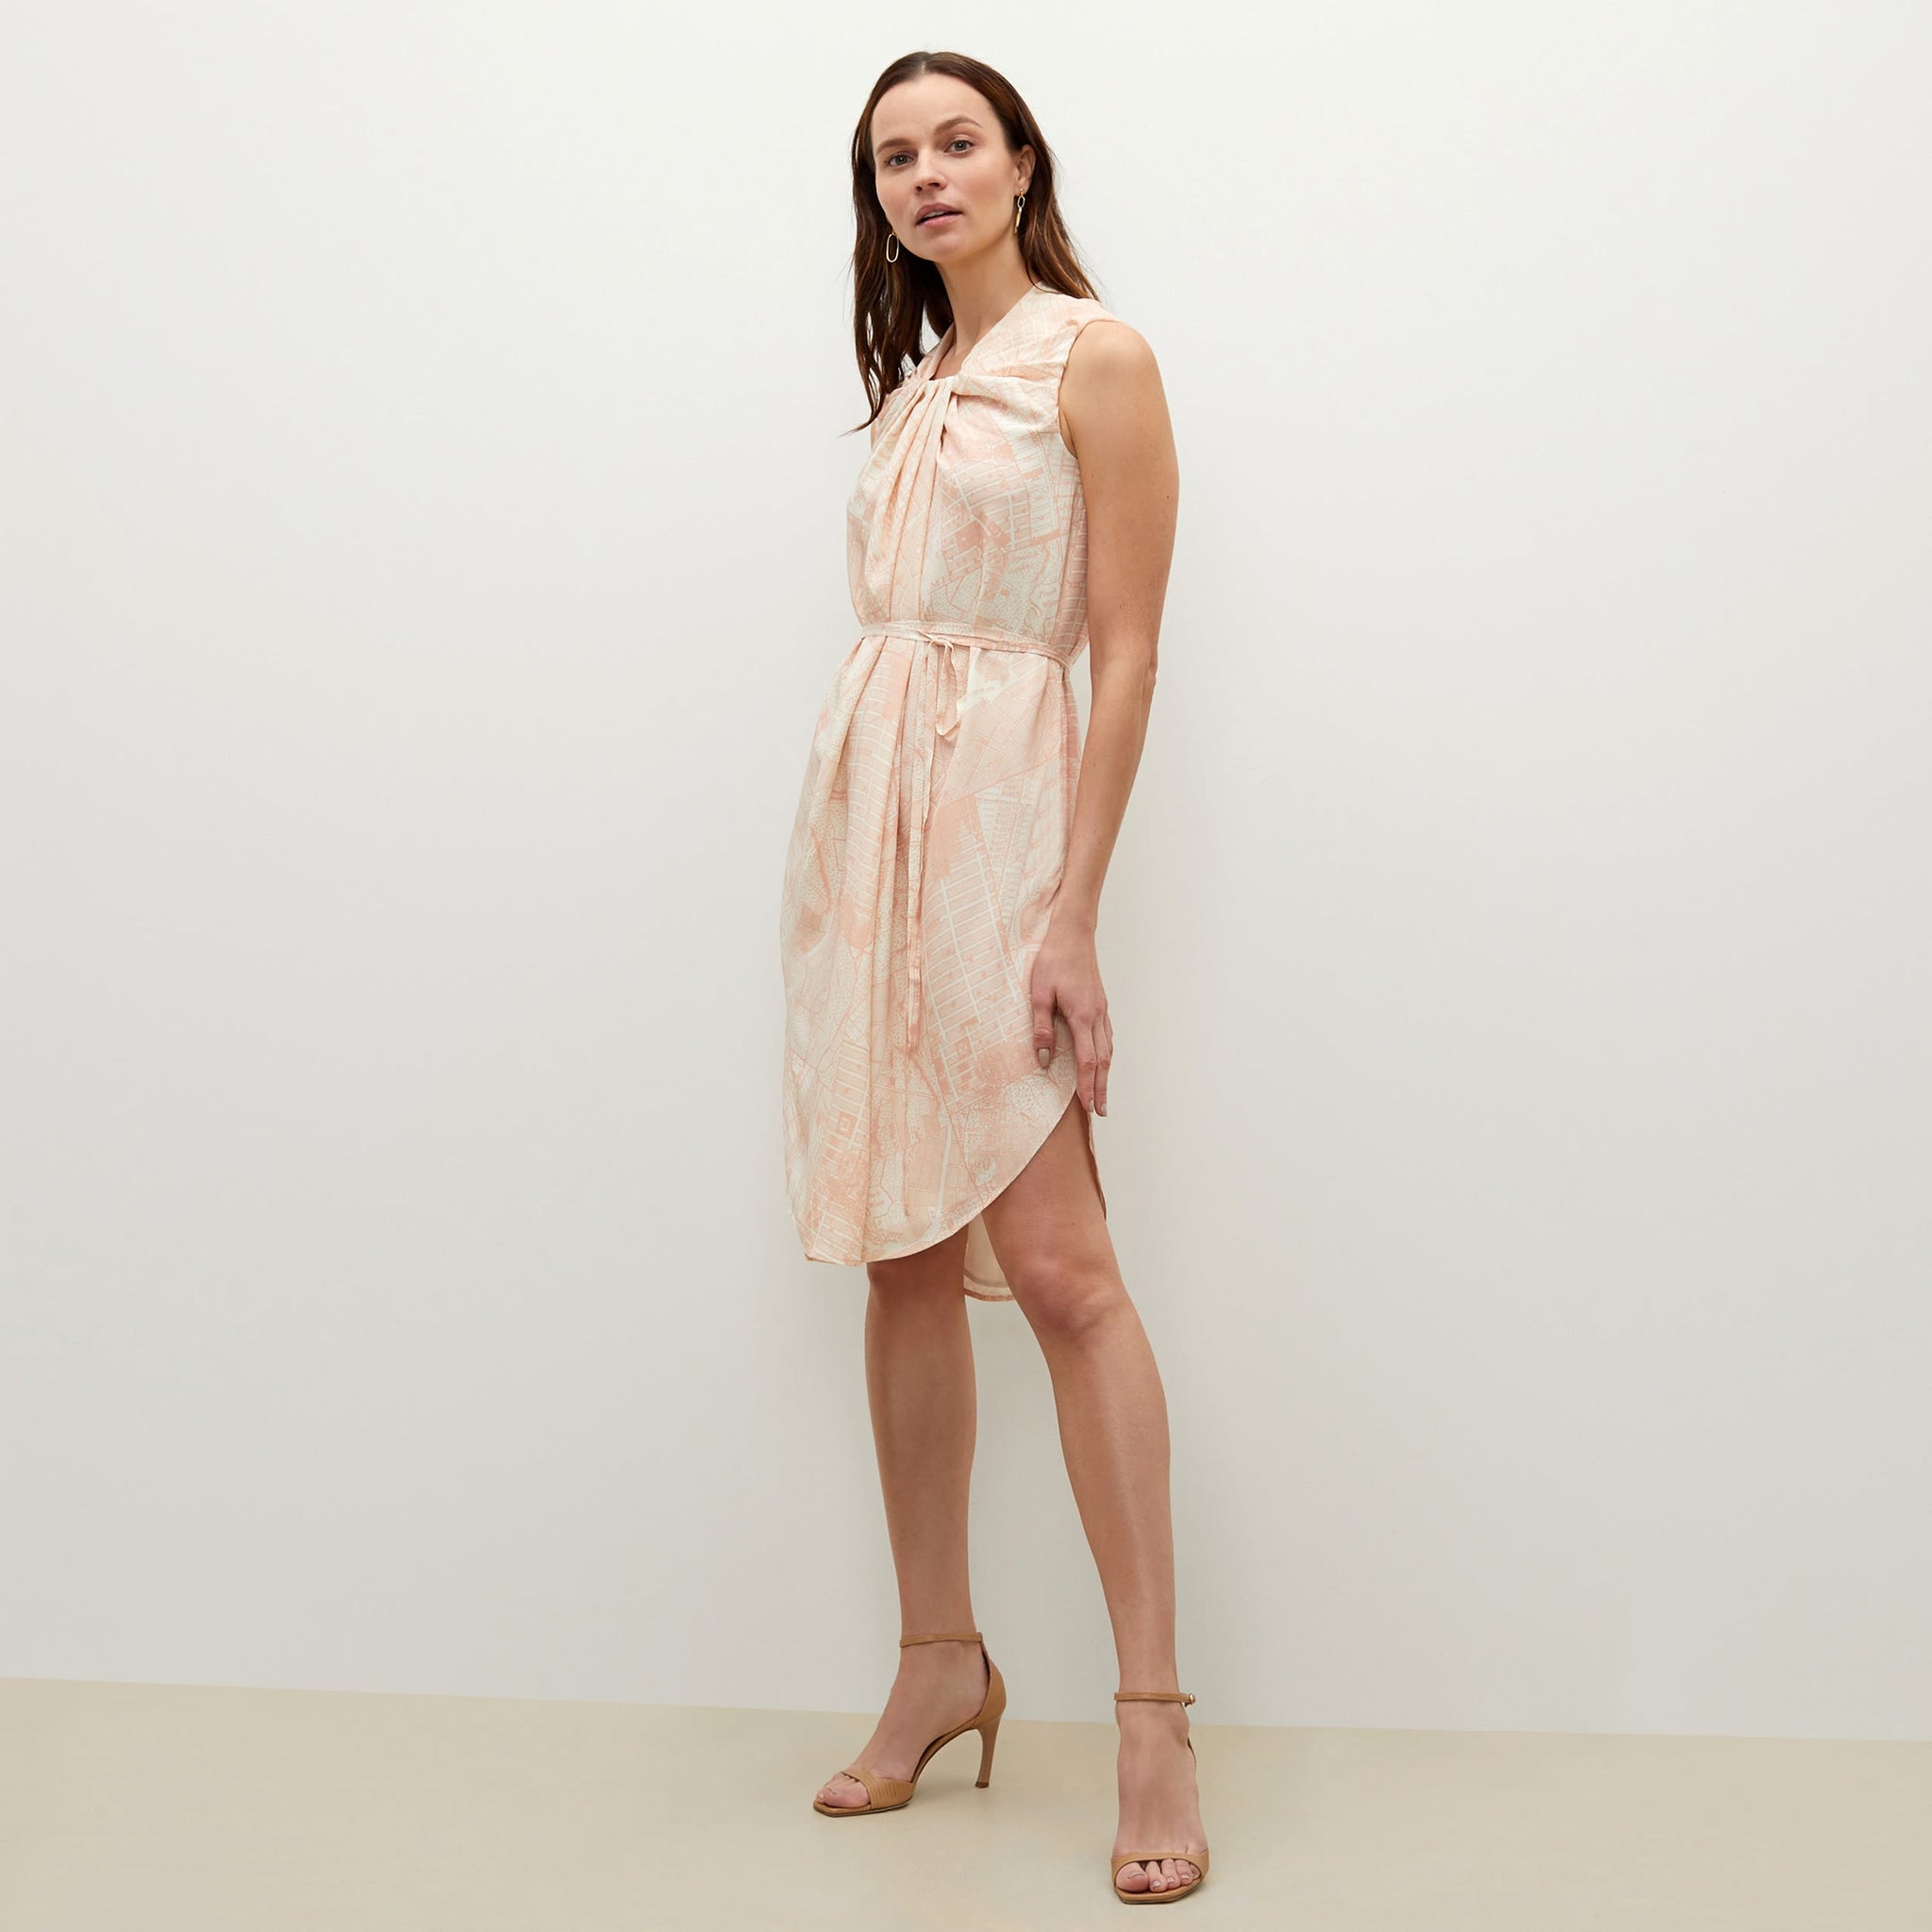 Side image of a woman standing wearing the Maite dress in ivory / cameo